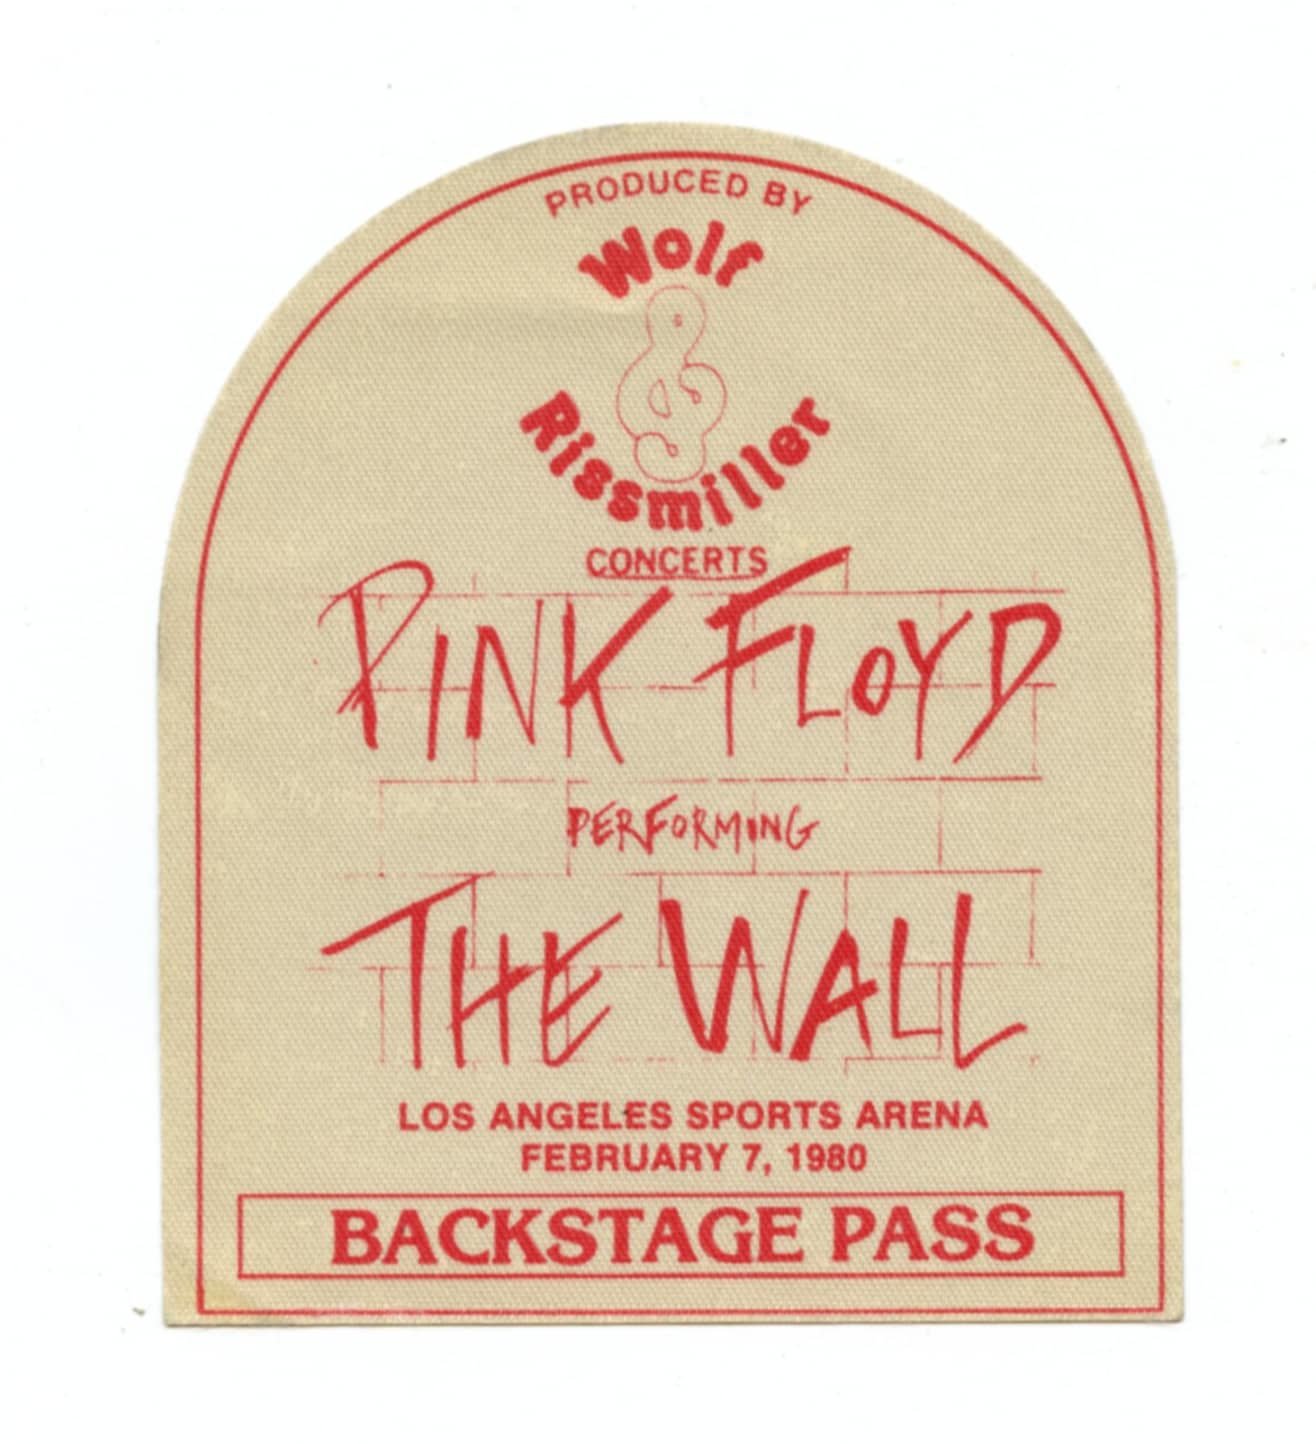 Pink Floyd Backstage Pass 1980 Feb 7 Los Angeles Sports Arena The Wall Tour